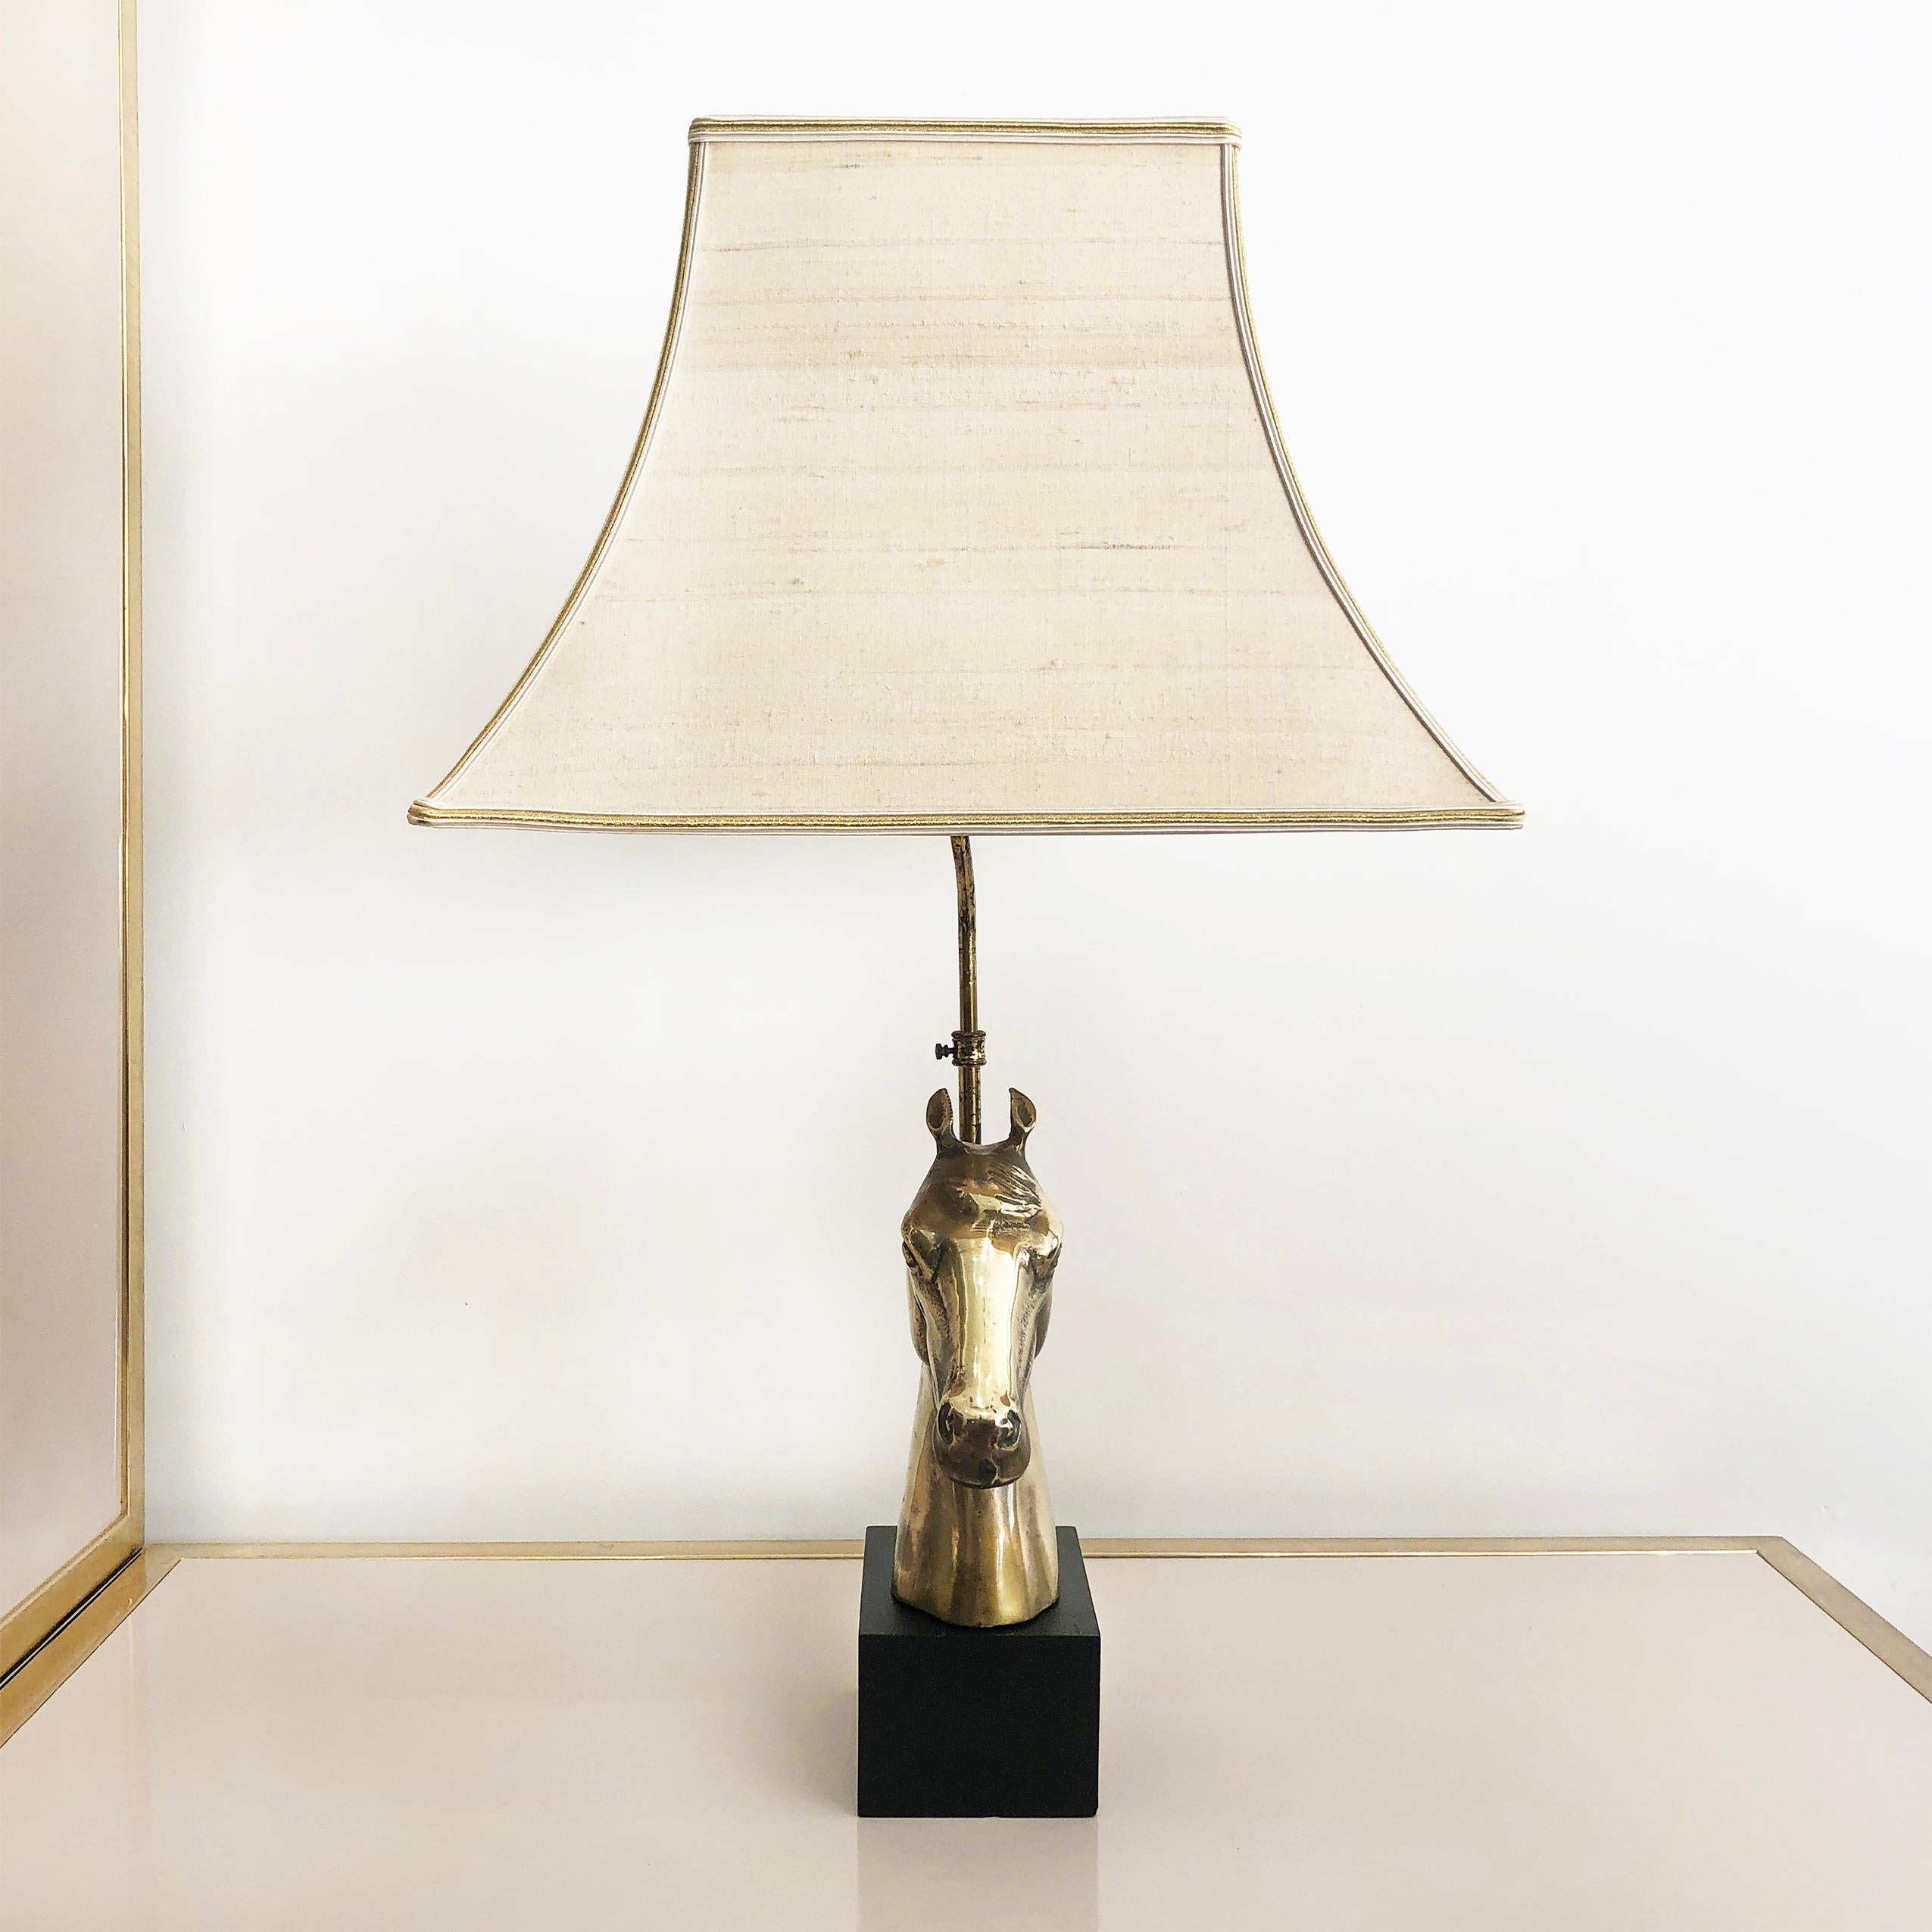 Late 20th Century Brass Horse Chinoiserie Table Lamp 1970s Hollywood Regency Midcentury Antique For Sale